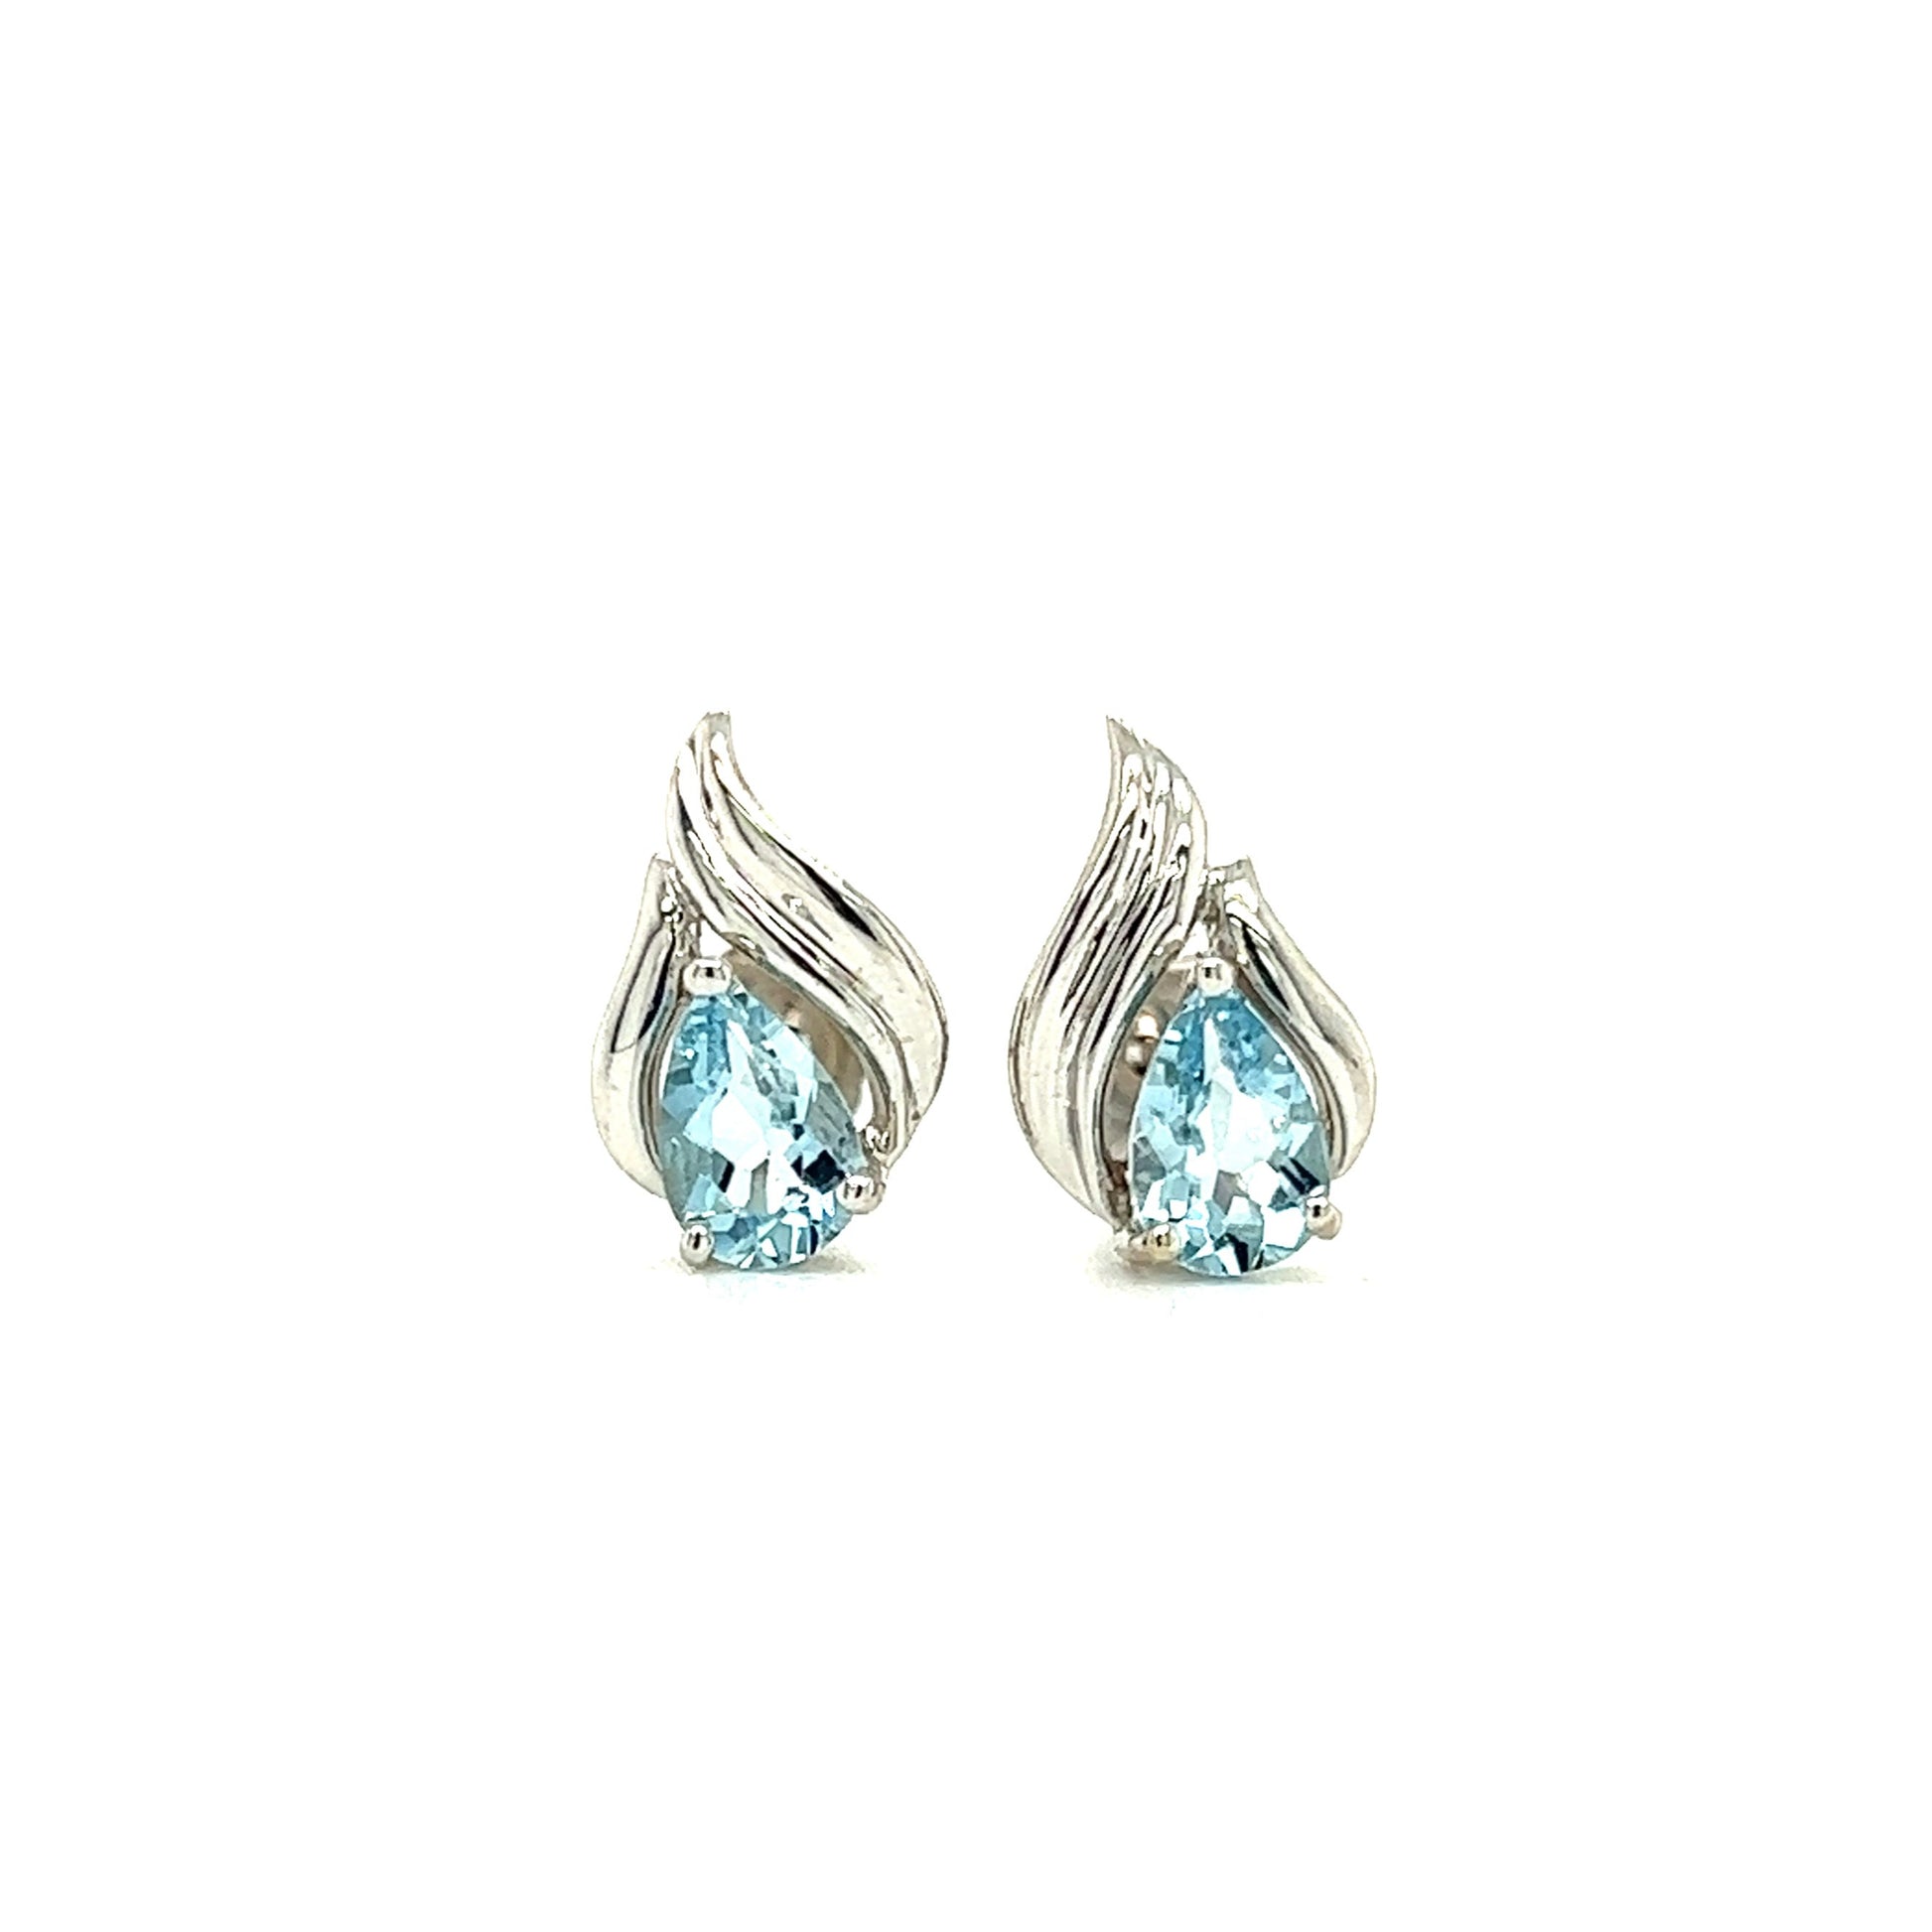 Pear Aquamarine Stud with Flame Motifs Earrings in 14K White Gold Front View